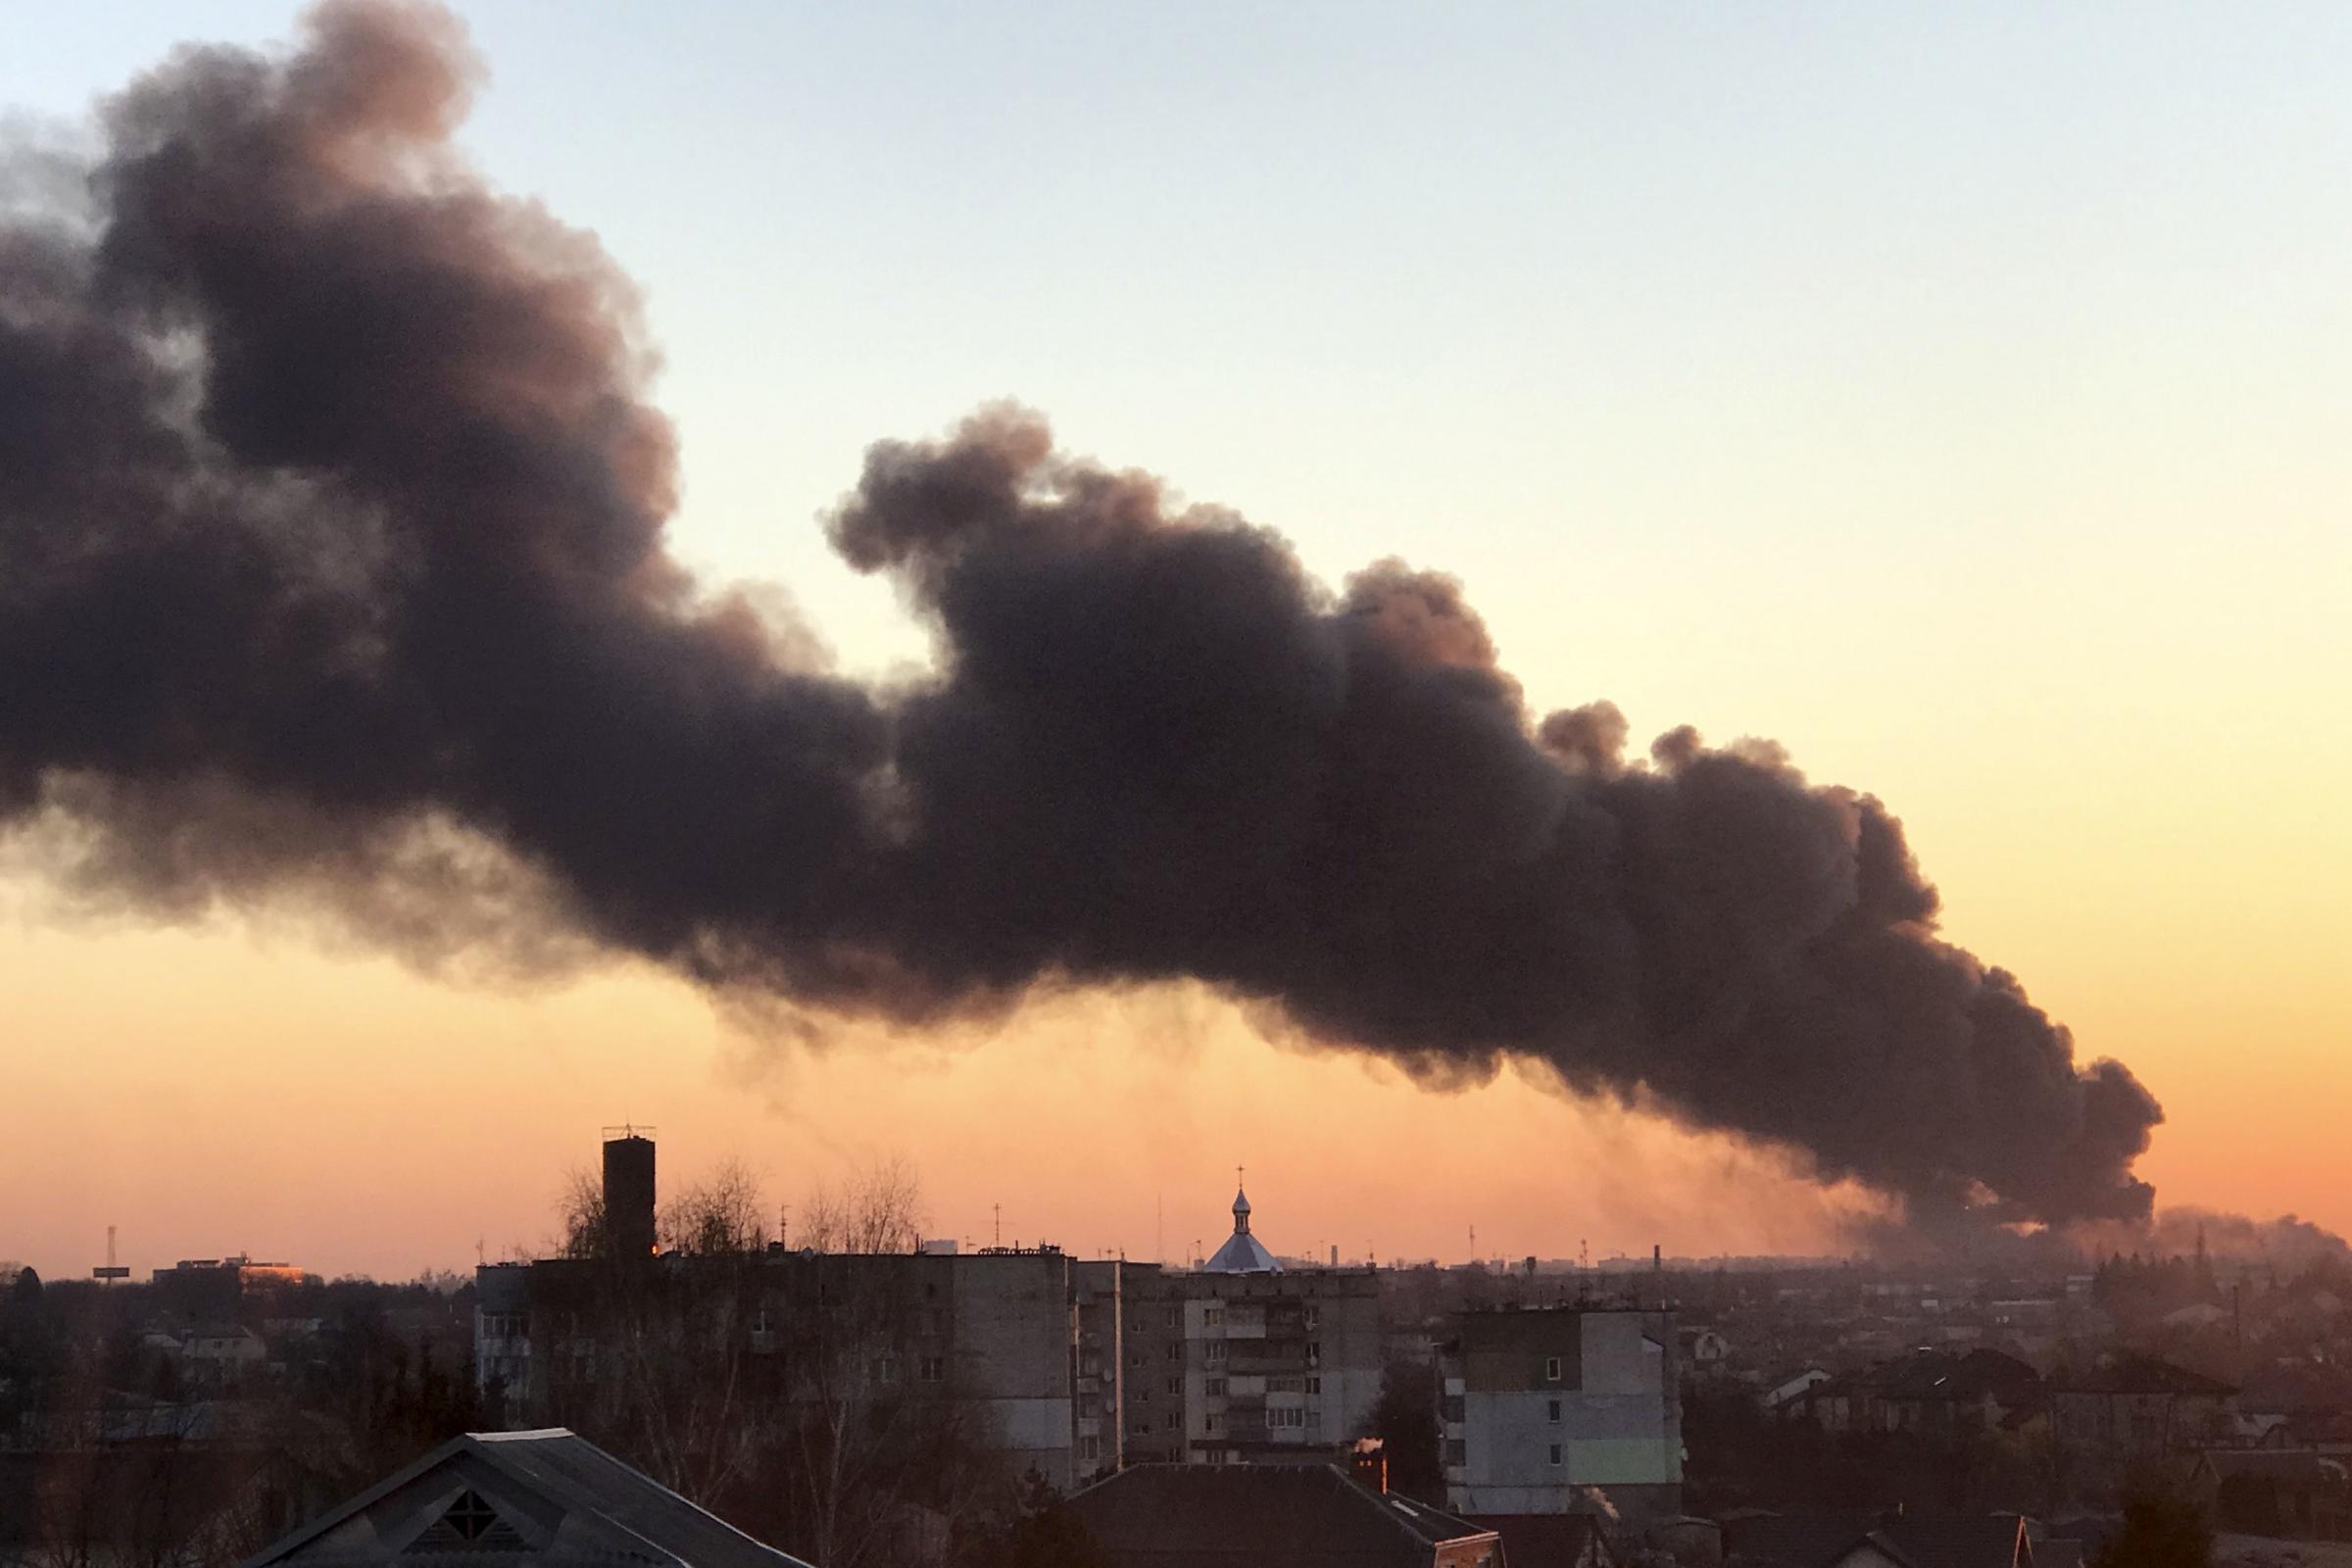 A cloud of smoke raises after an explosion in Lviv, western Ukraine, Friday, March 18, 2022. The mayor of Lviv says missiles struck near the citys airport early Friday. (AP Photo) 